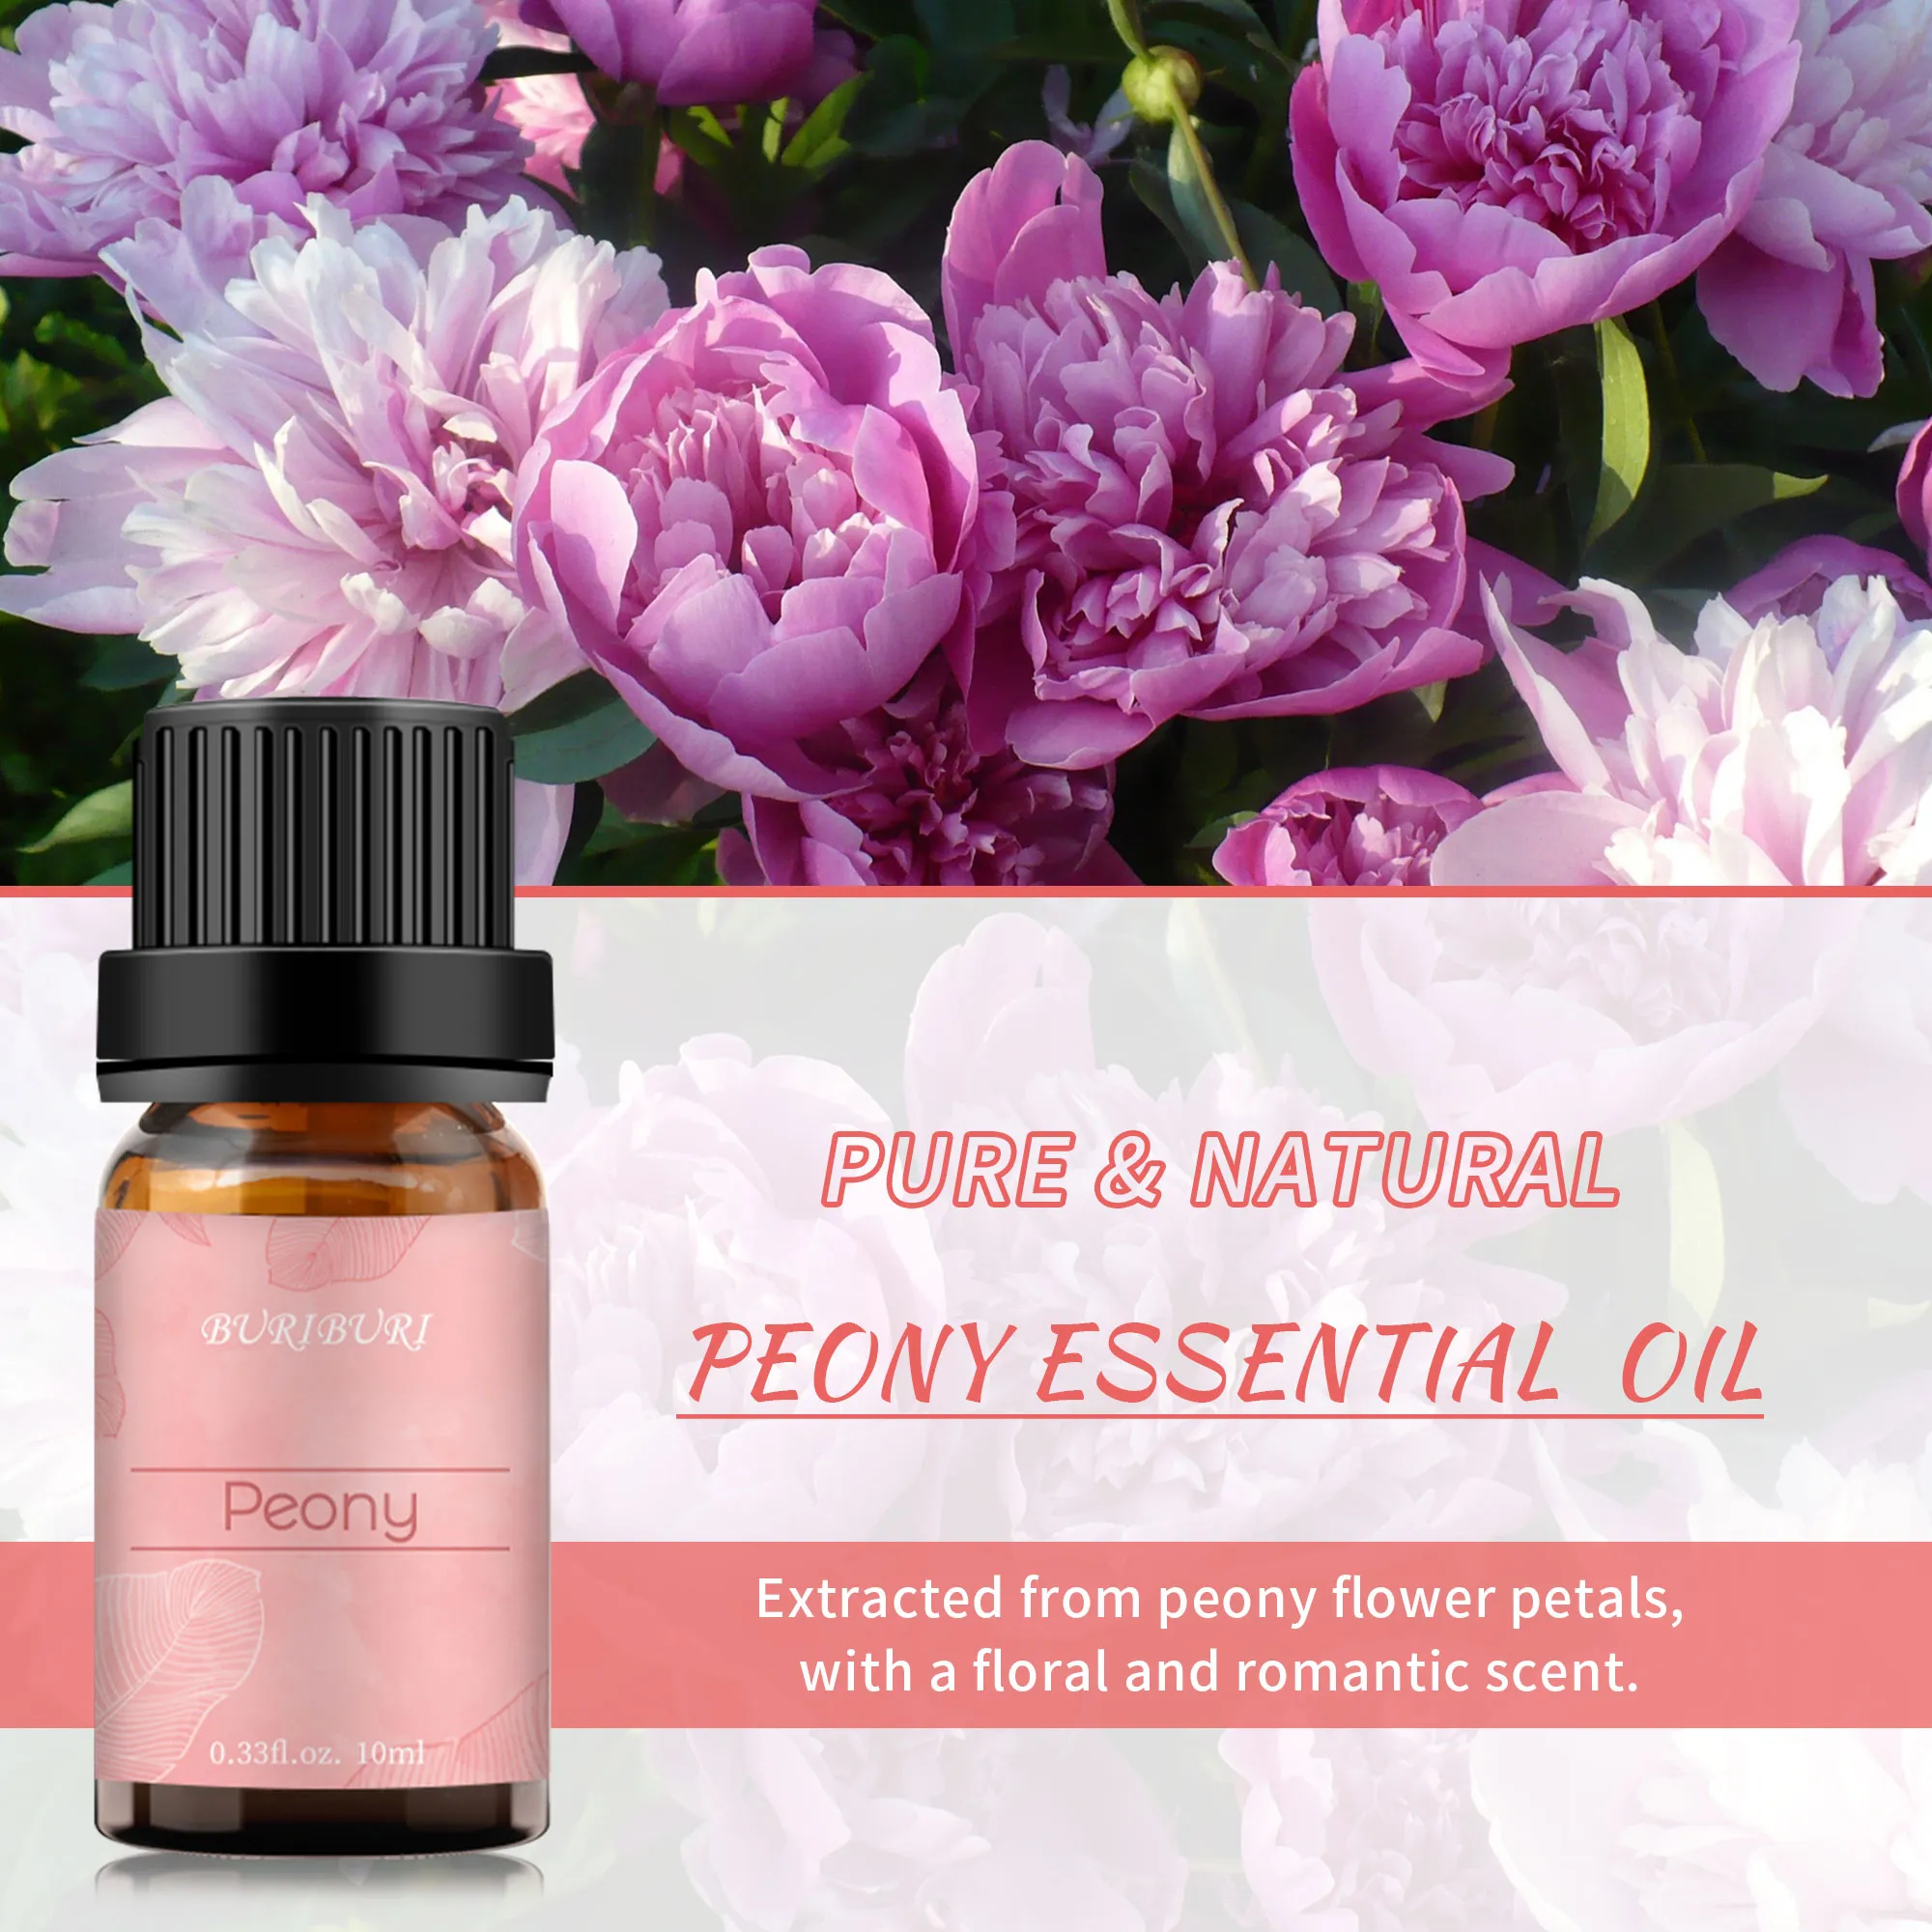 AKARZ Famous brand natural aromatherapy Peony essential oil